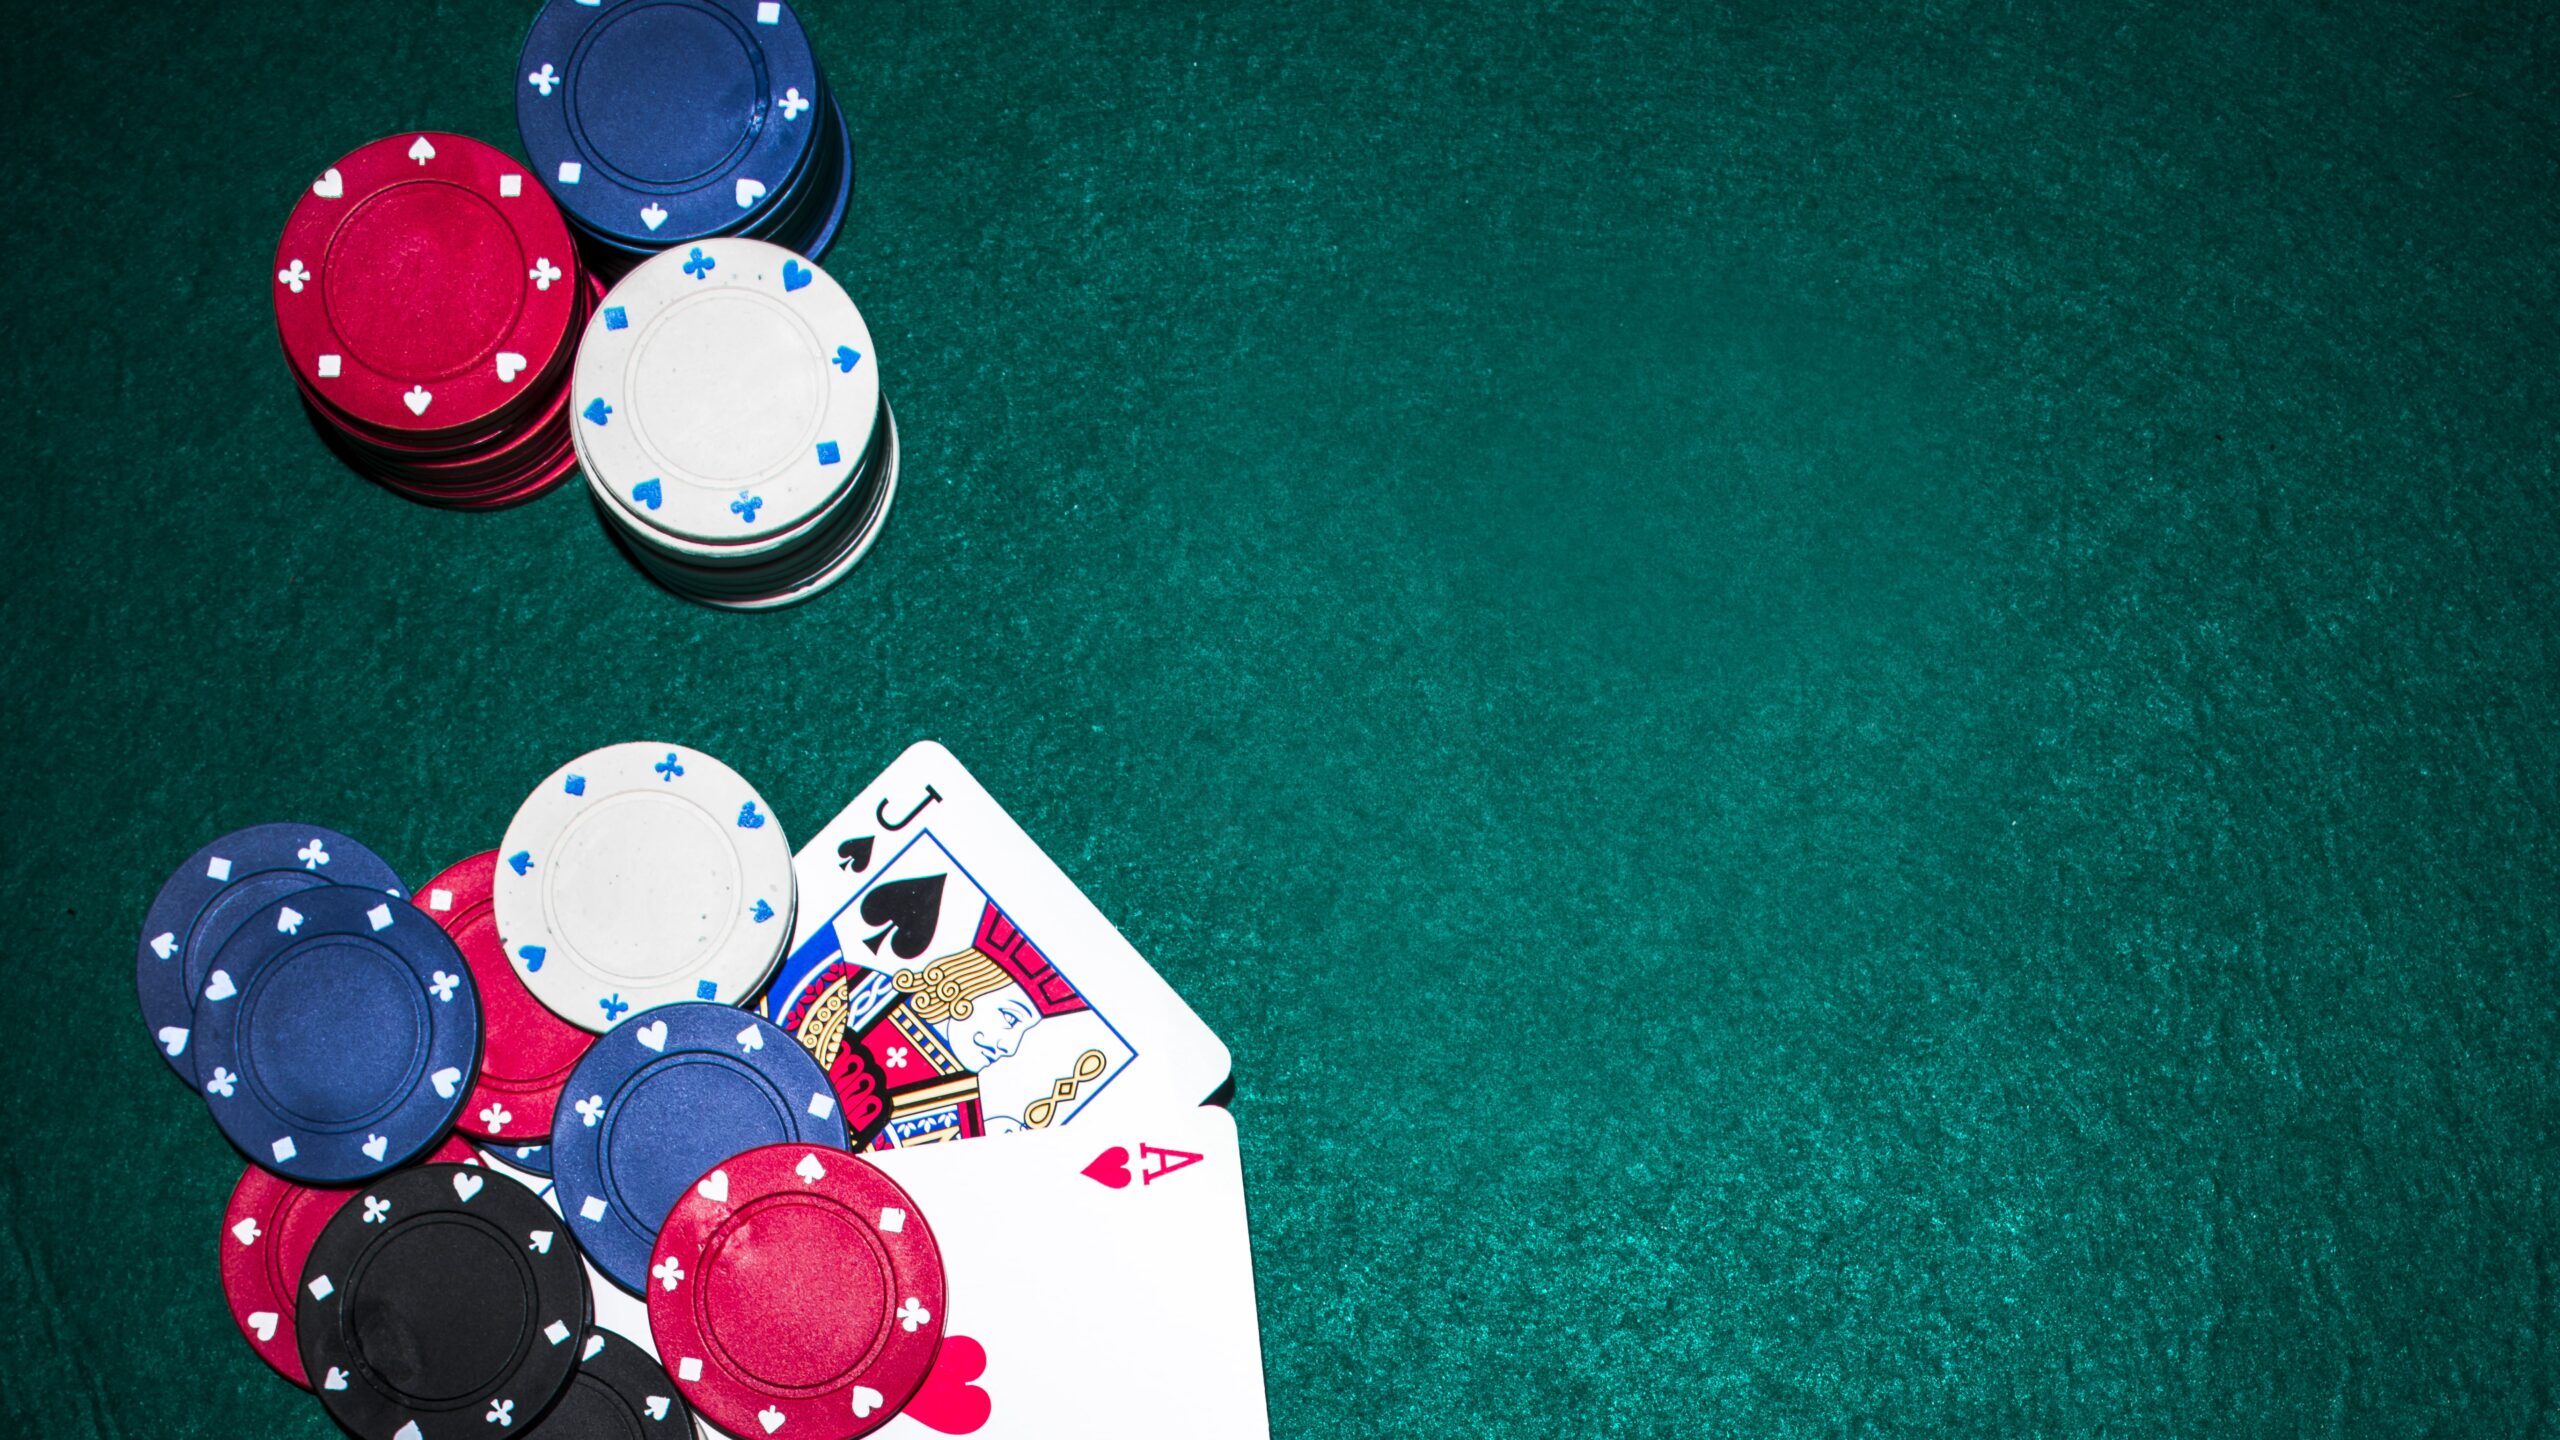 What are the things that you should know for registration at online casino?